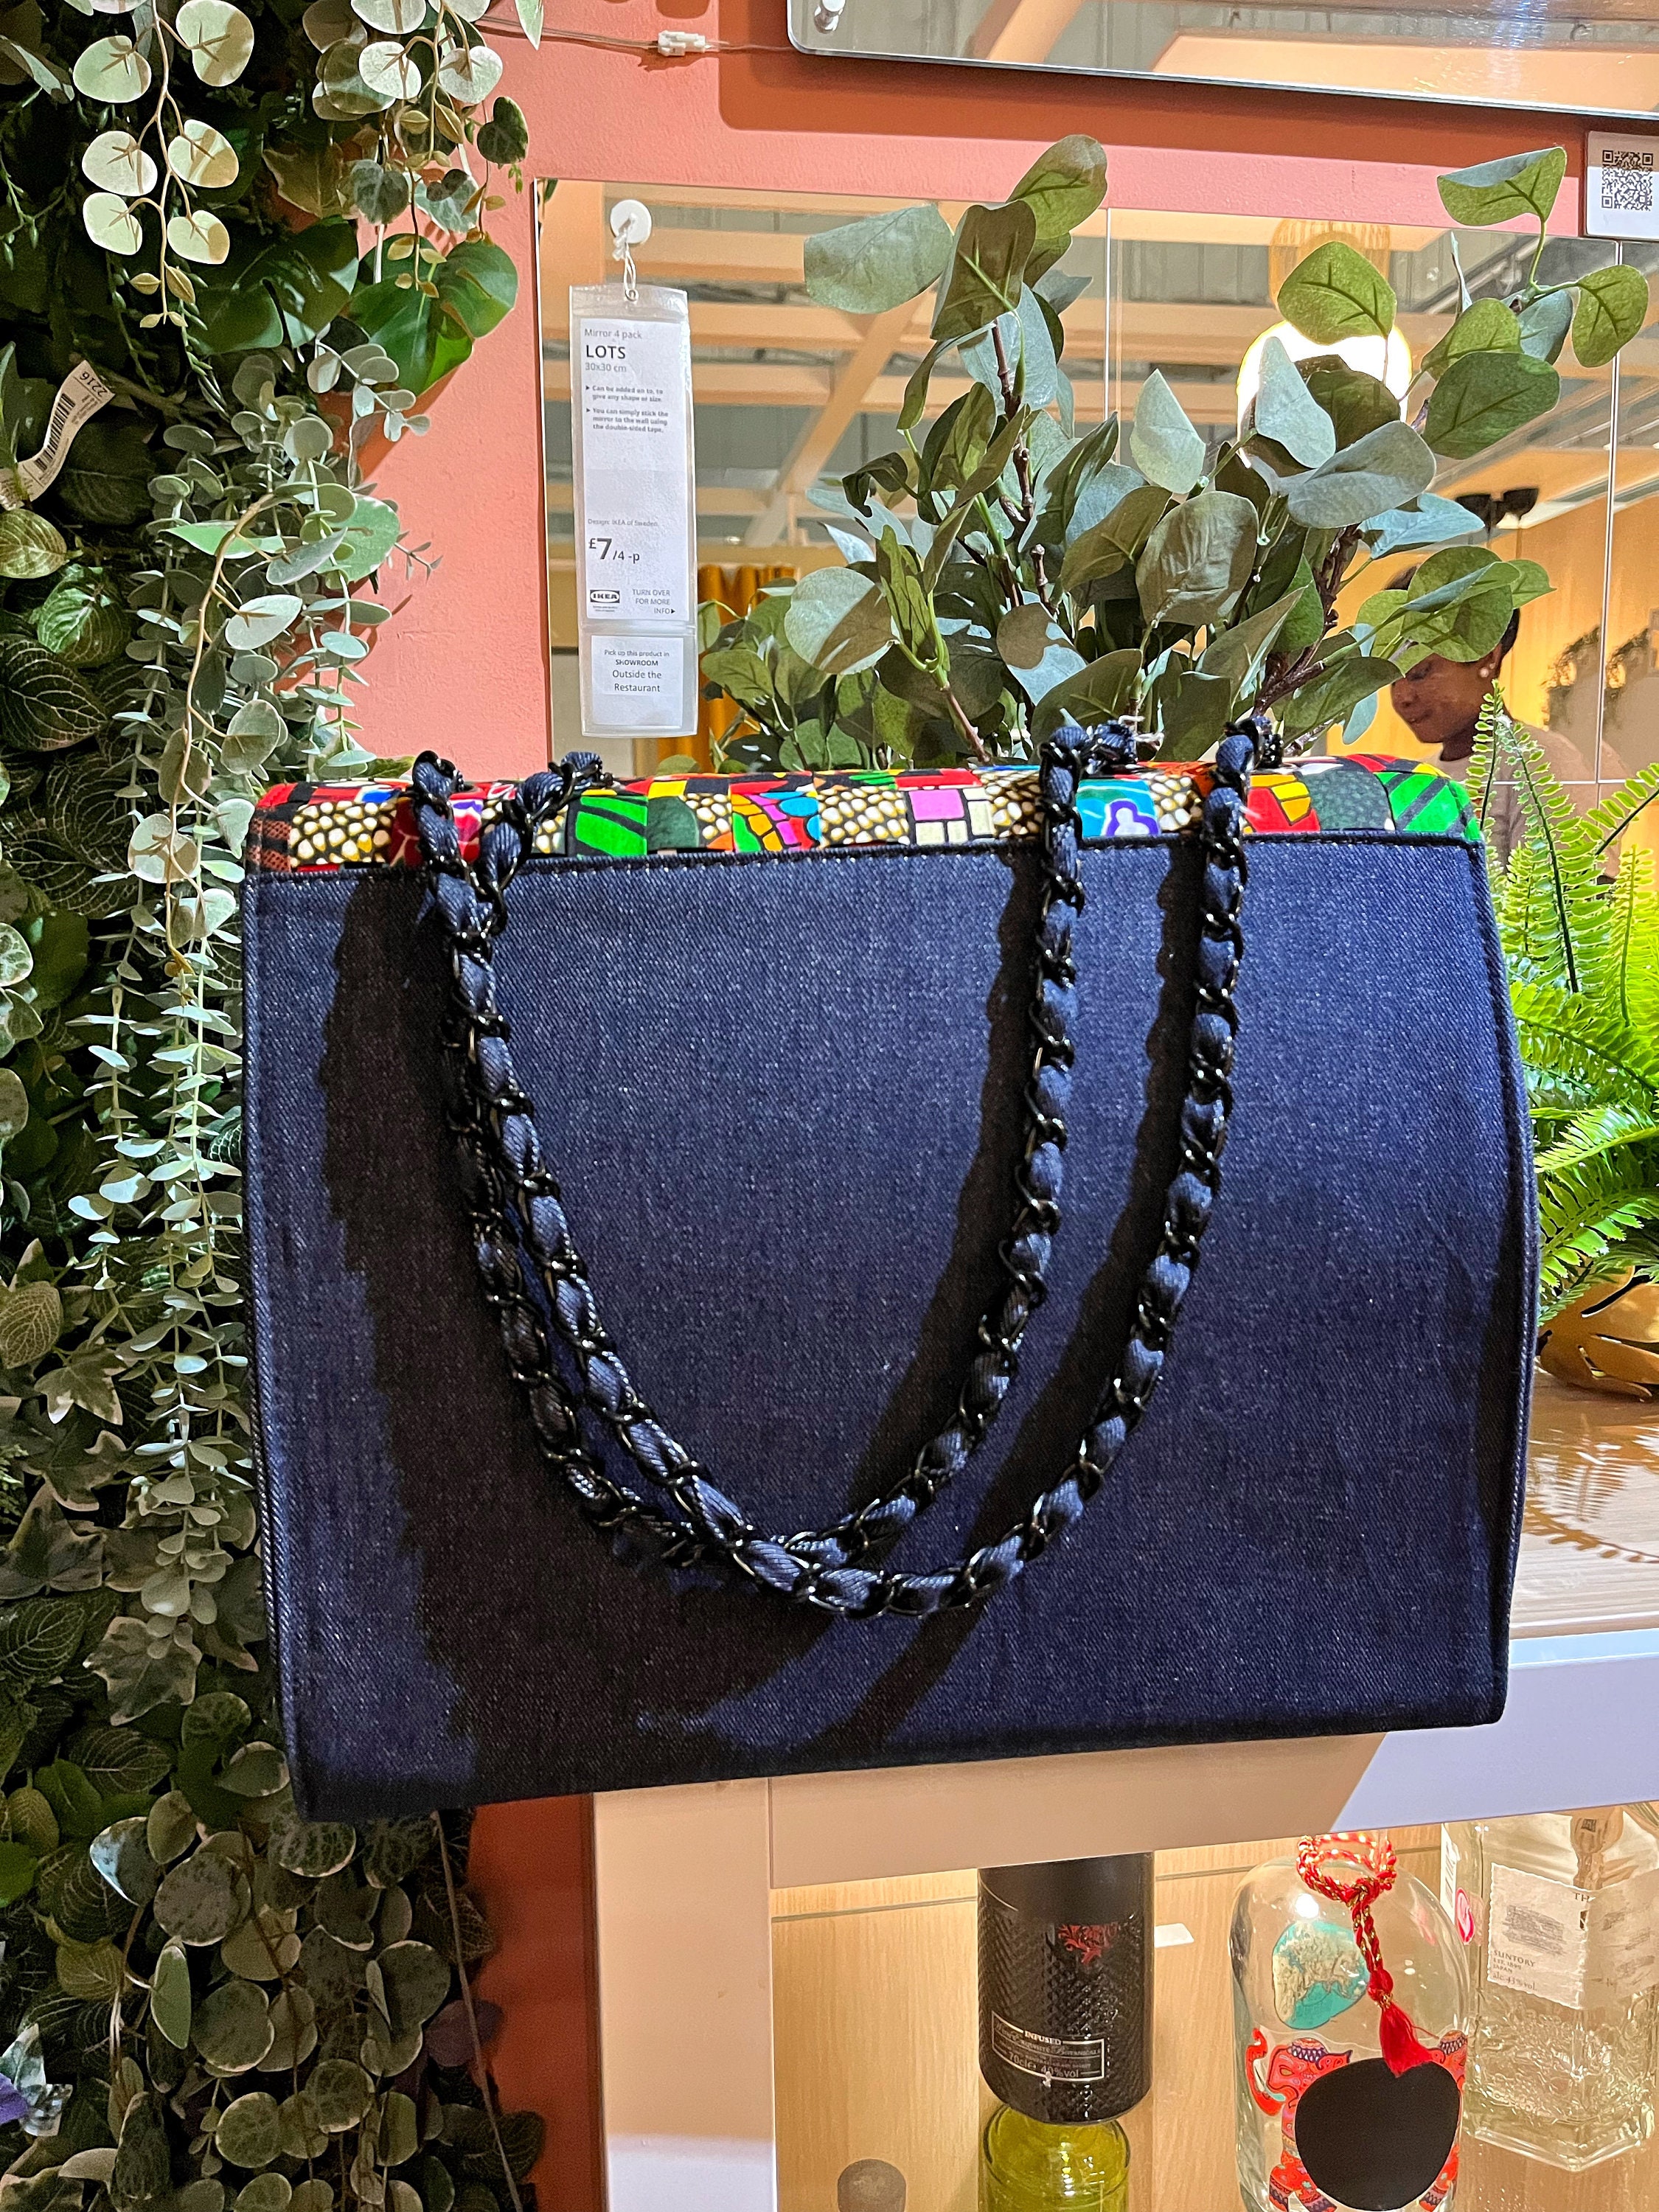 chanel large canvas tote